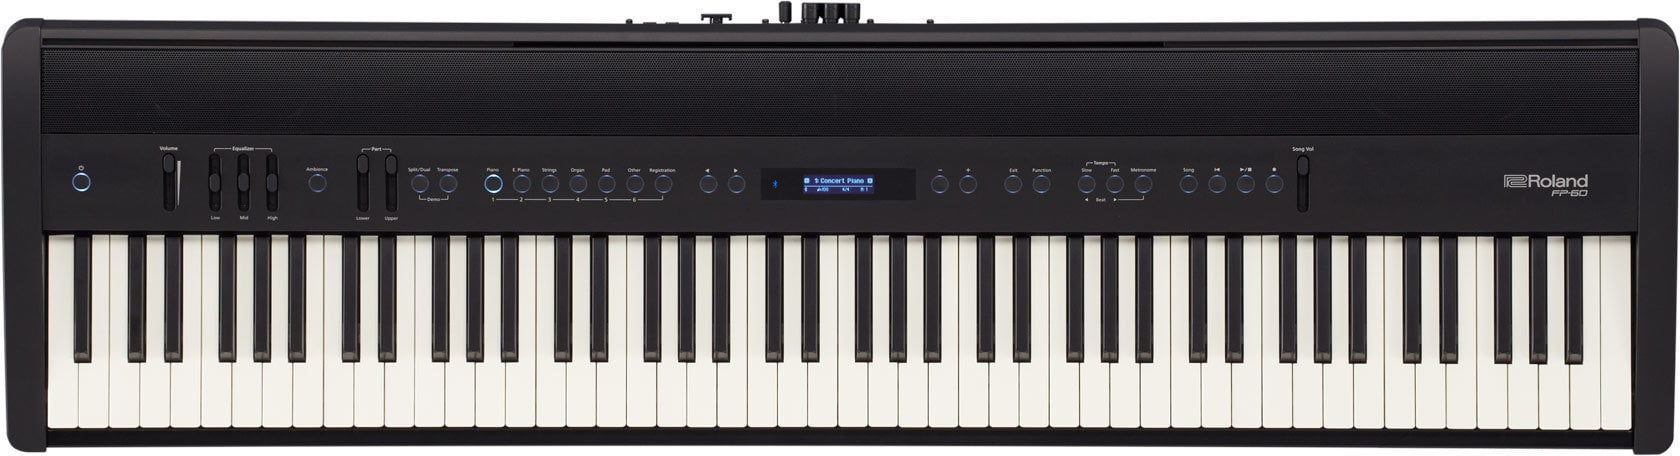 Cyfrowe stage pianino Roland FP-60 BK Cyfrowe stage pianino